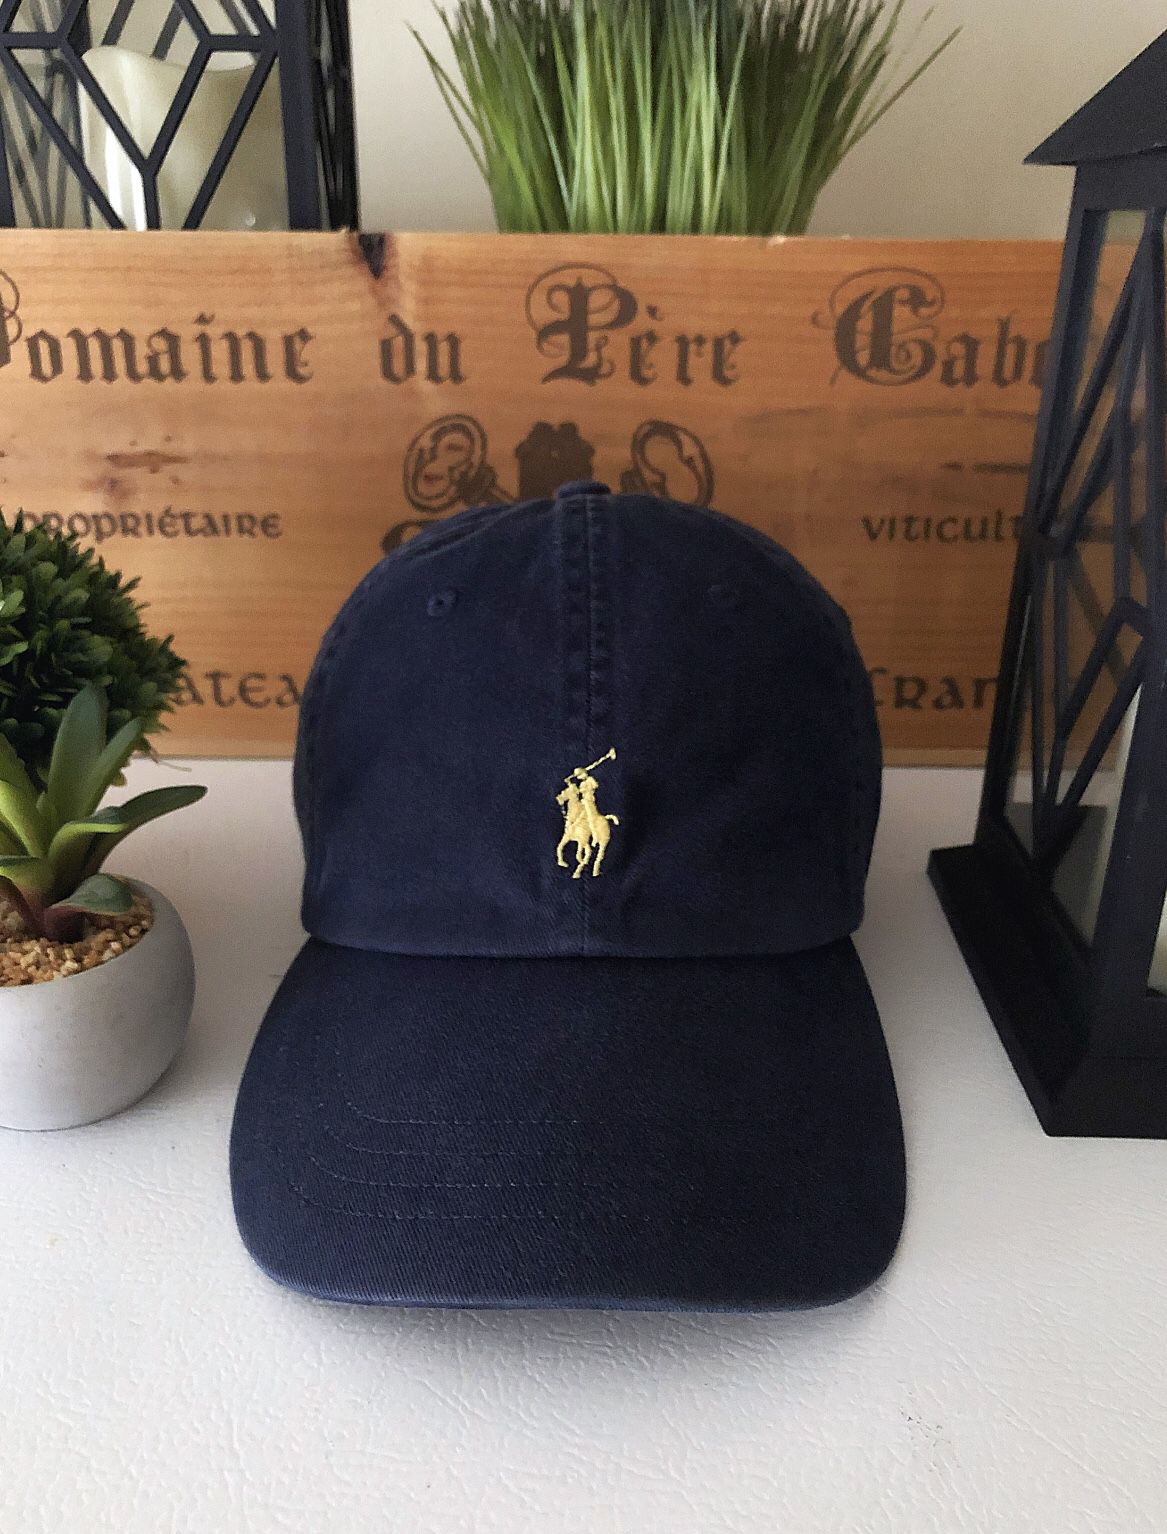 Men’s Polo RL Core Classic Sport Cap retail $45 Like new! Zero signs of wear. Navy blue with leather strap and gold embroidered logo. Adjustable back